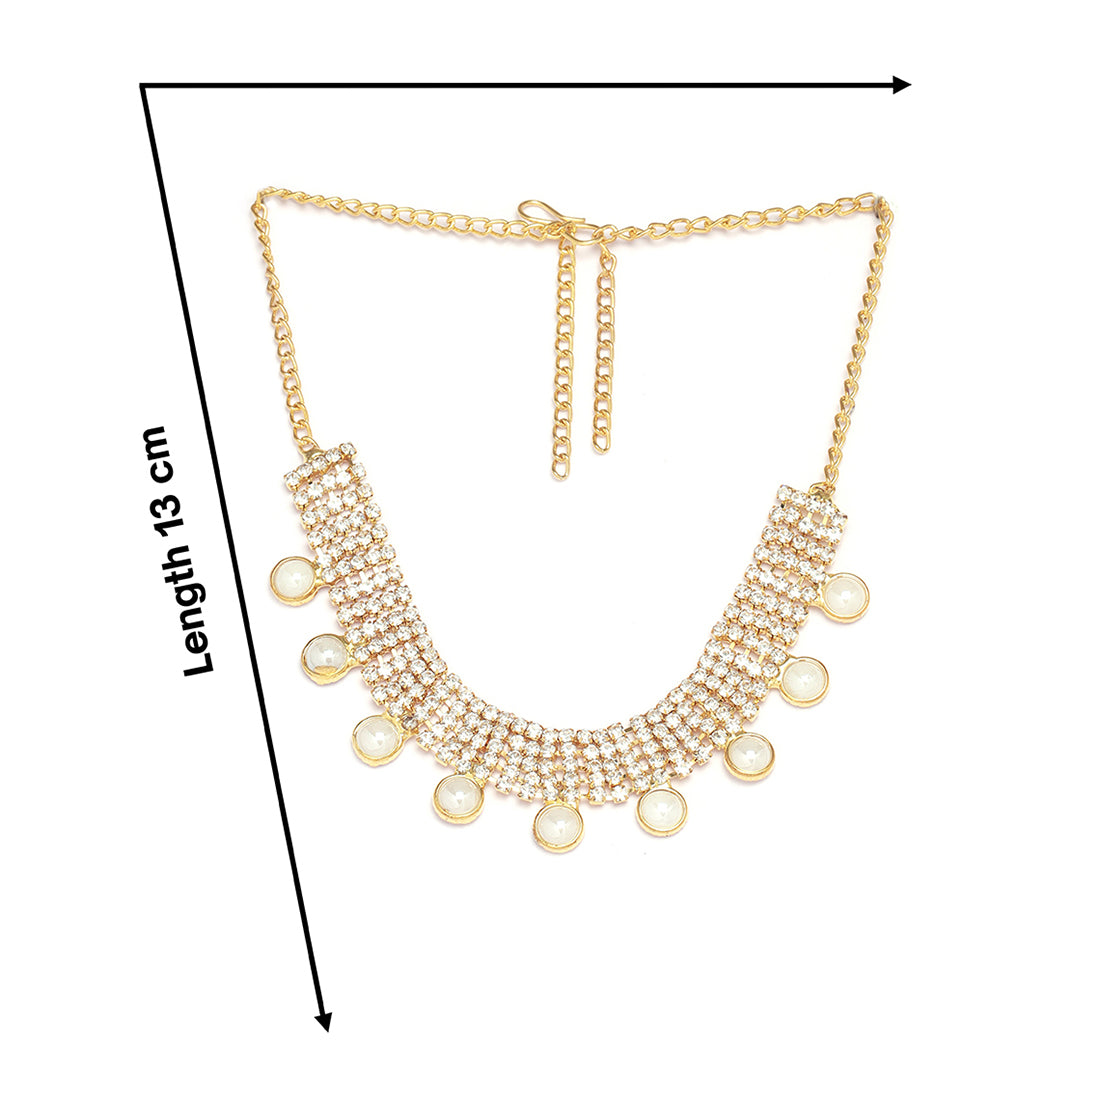 Gold-Toned Five-Row Diamonti And Pearl Drops Necklace